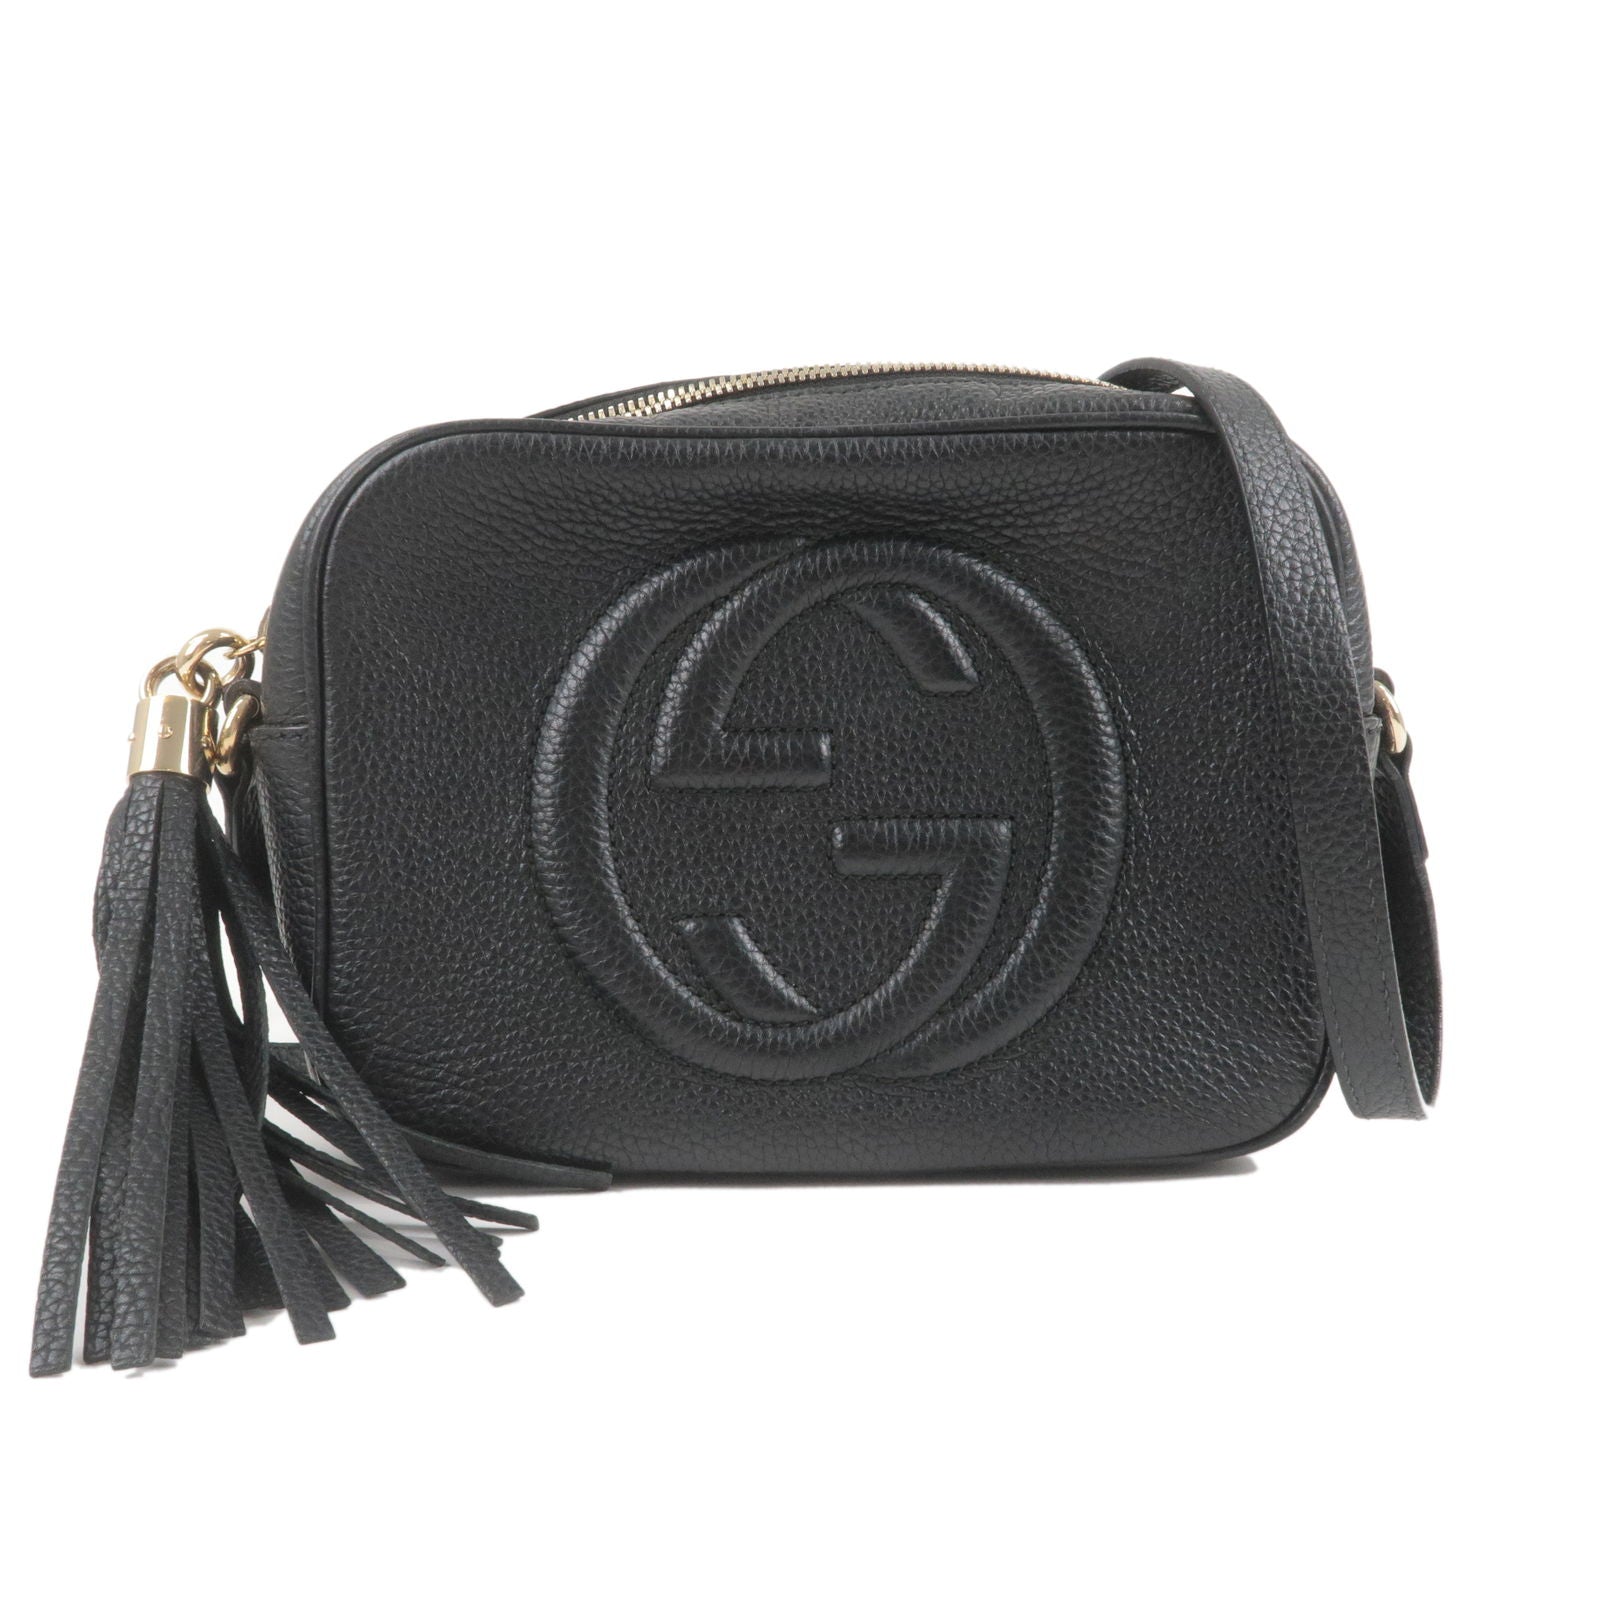 GUCCI-SOHO-Small-Disco-Leather-Shoulder-Bag-Black-308364 – dct